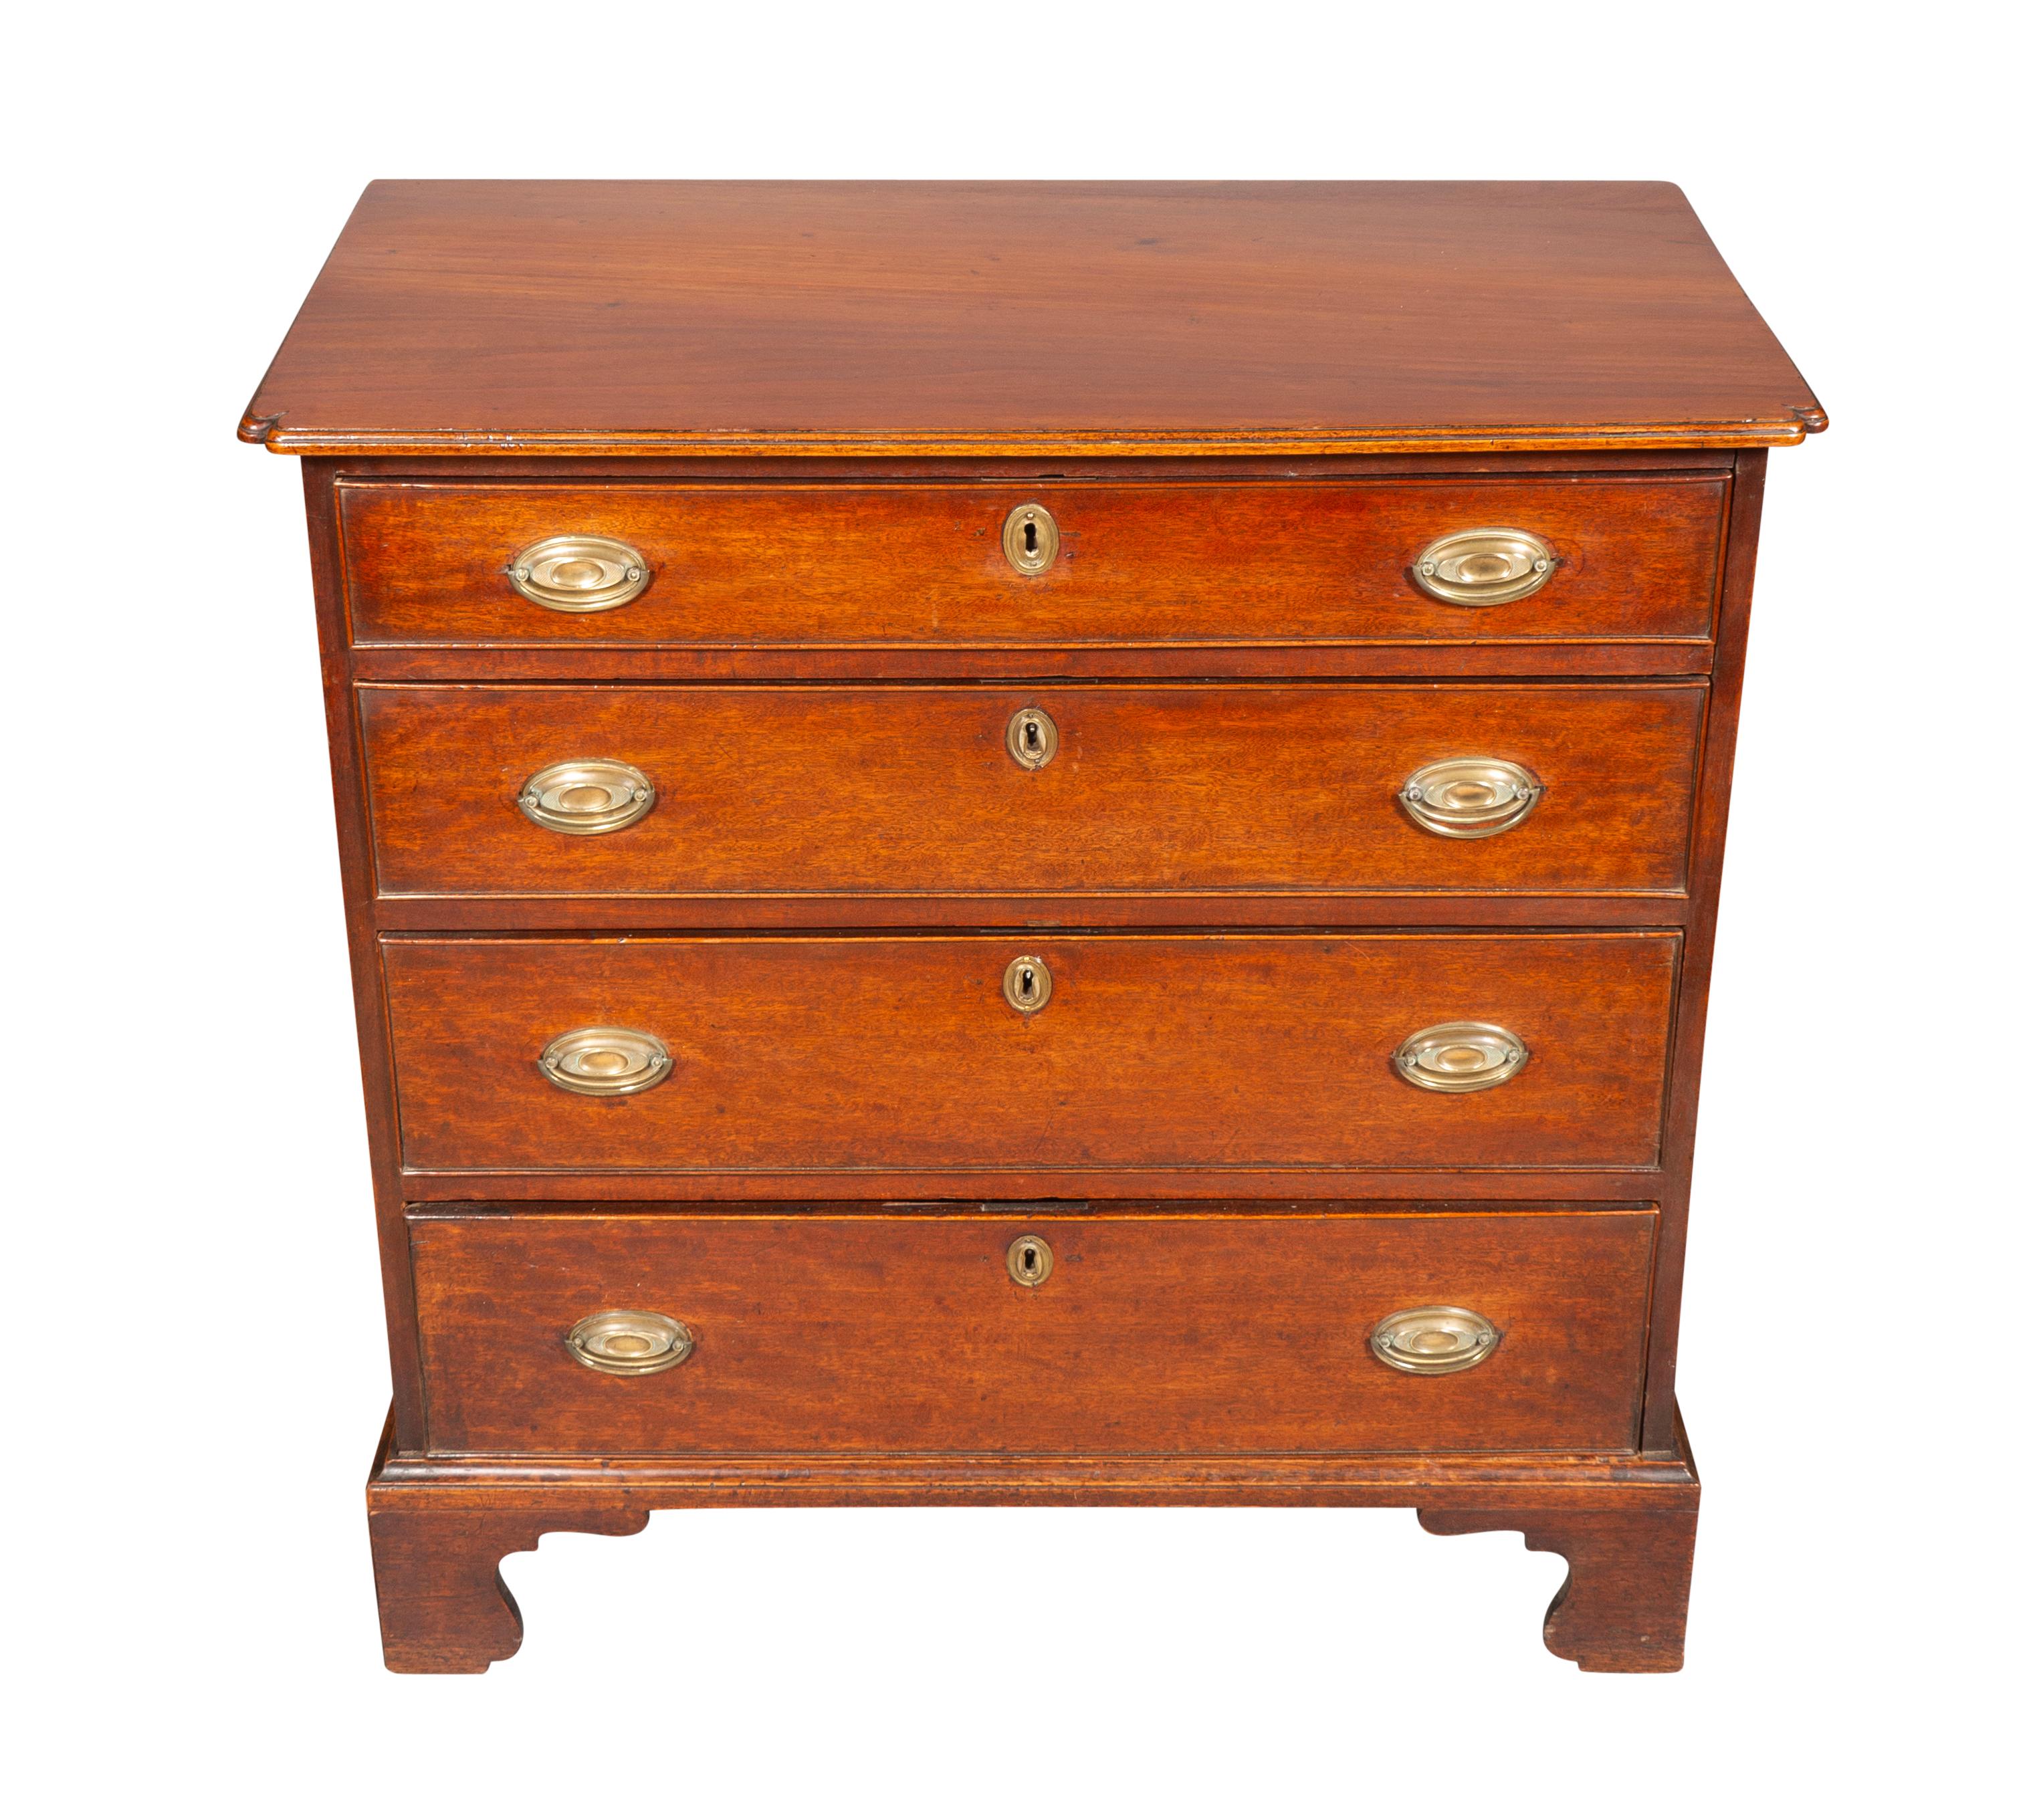 Rectangular top with pinched corners over four graduated drawers with oval brass handles.
Bracket feet.